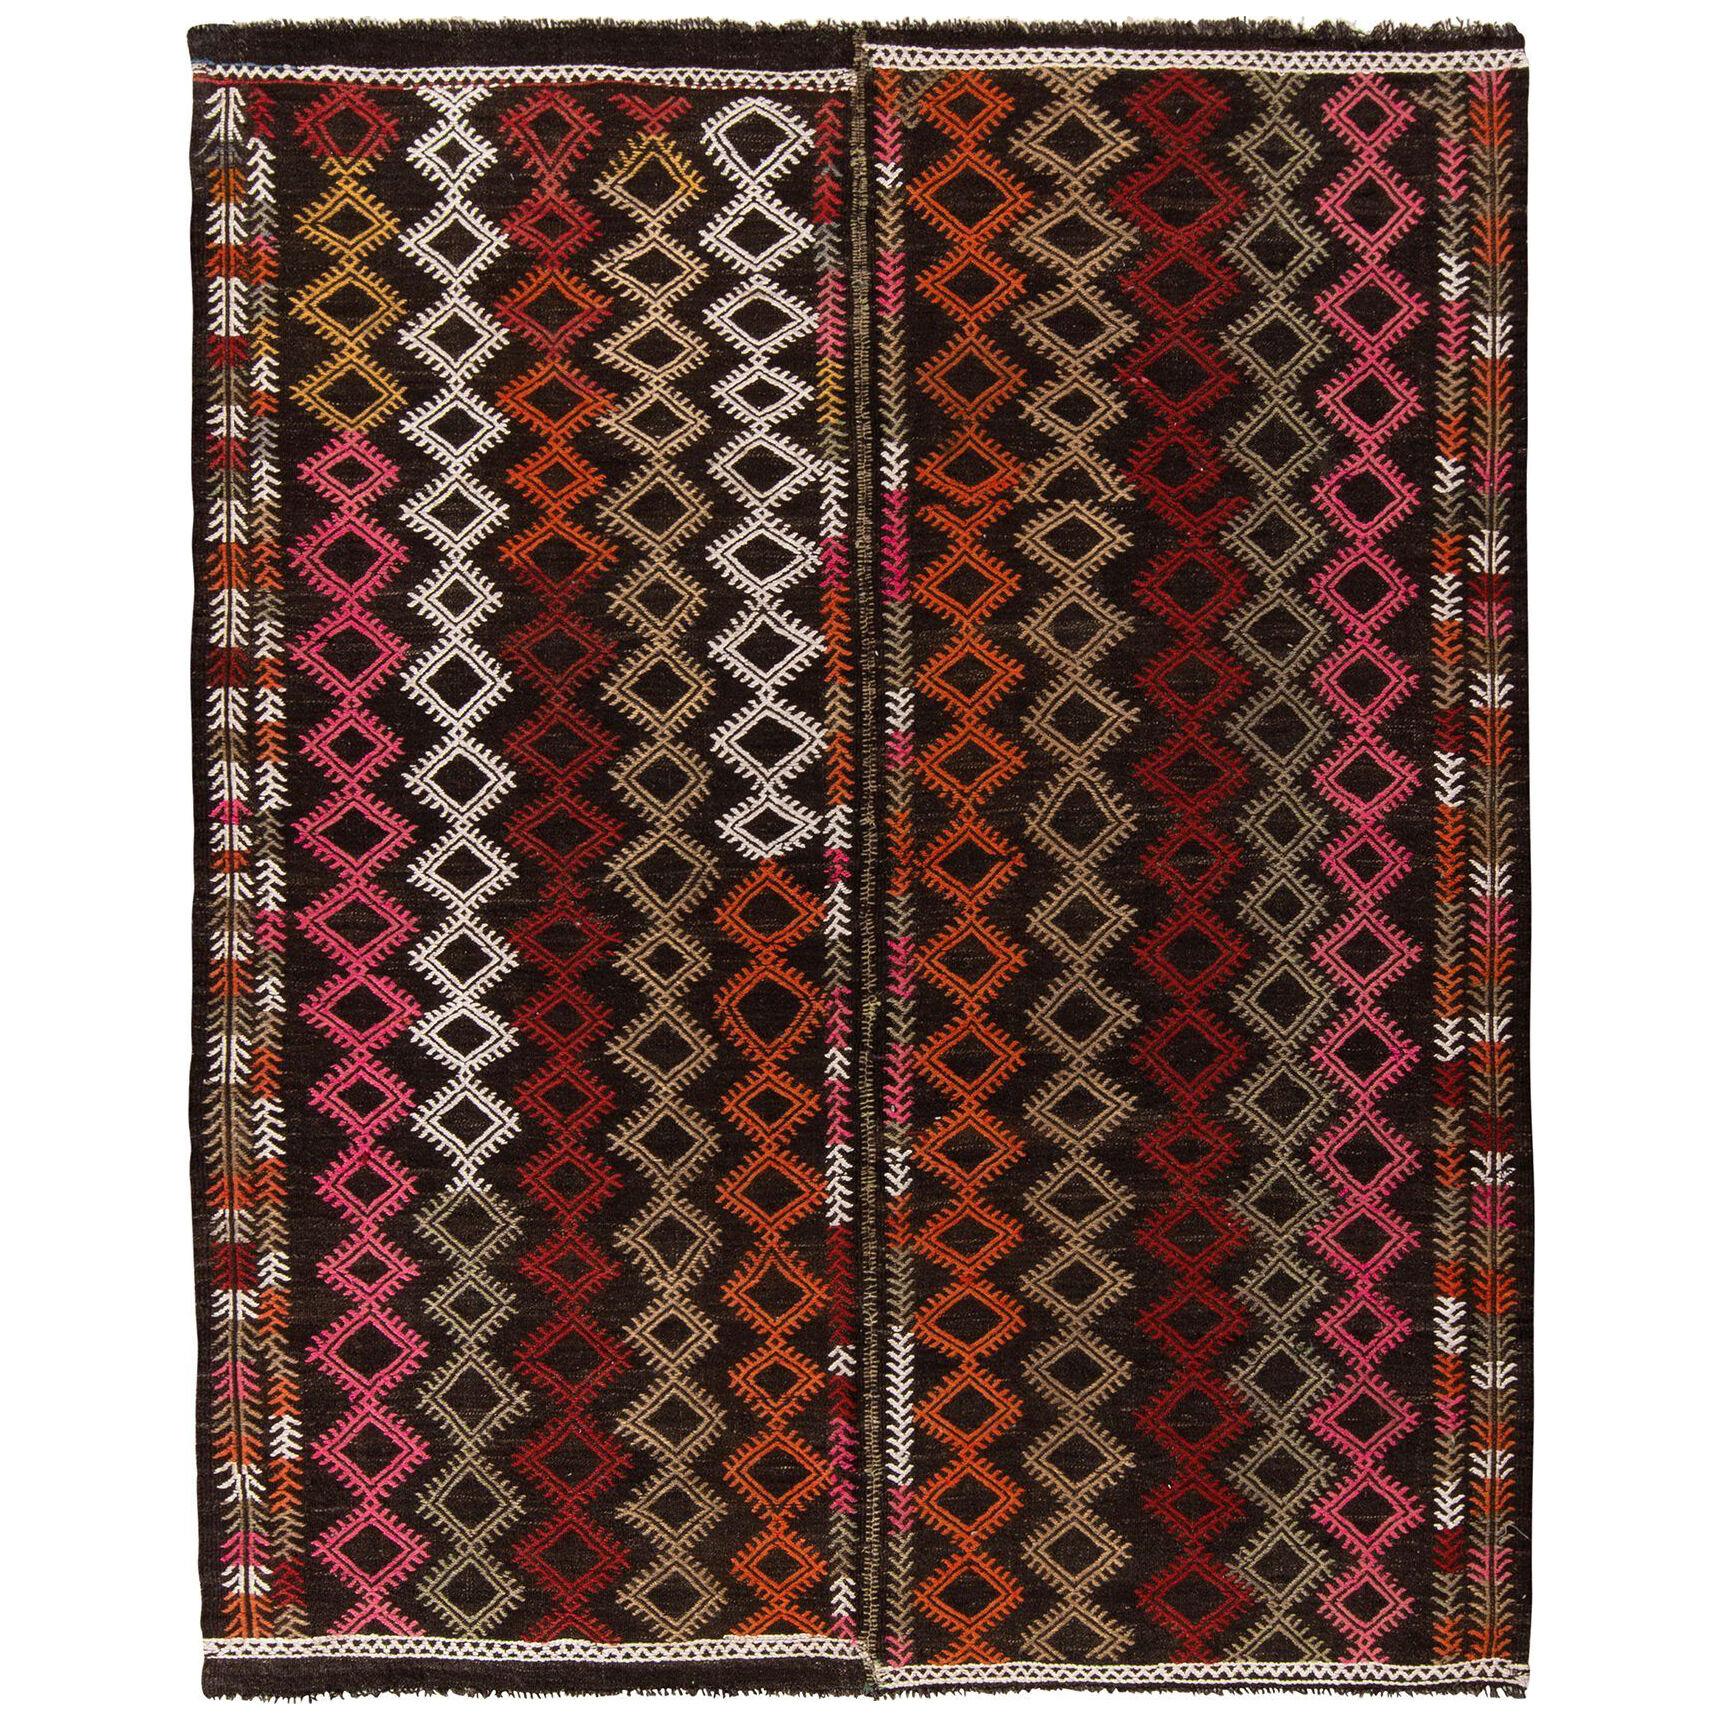 Handwoven Vintage Turkish Kilim in Multicolor Embroidery Geometric Pattern